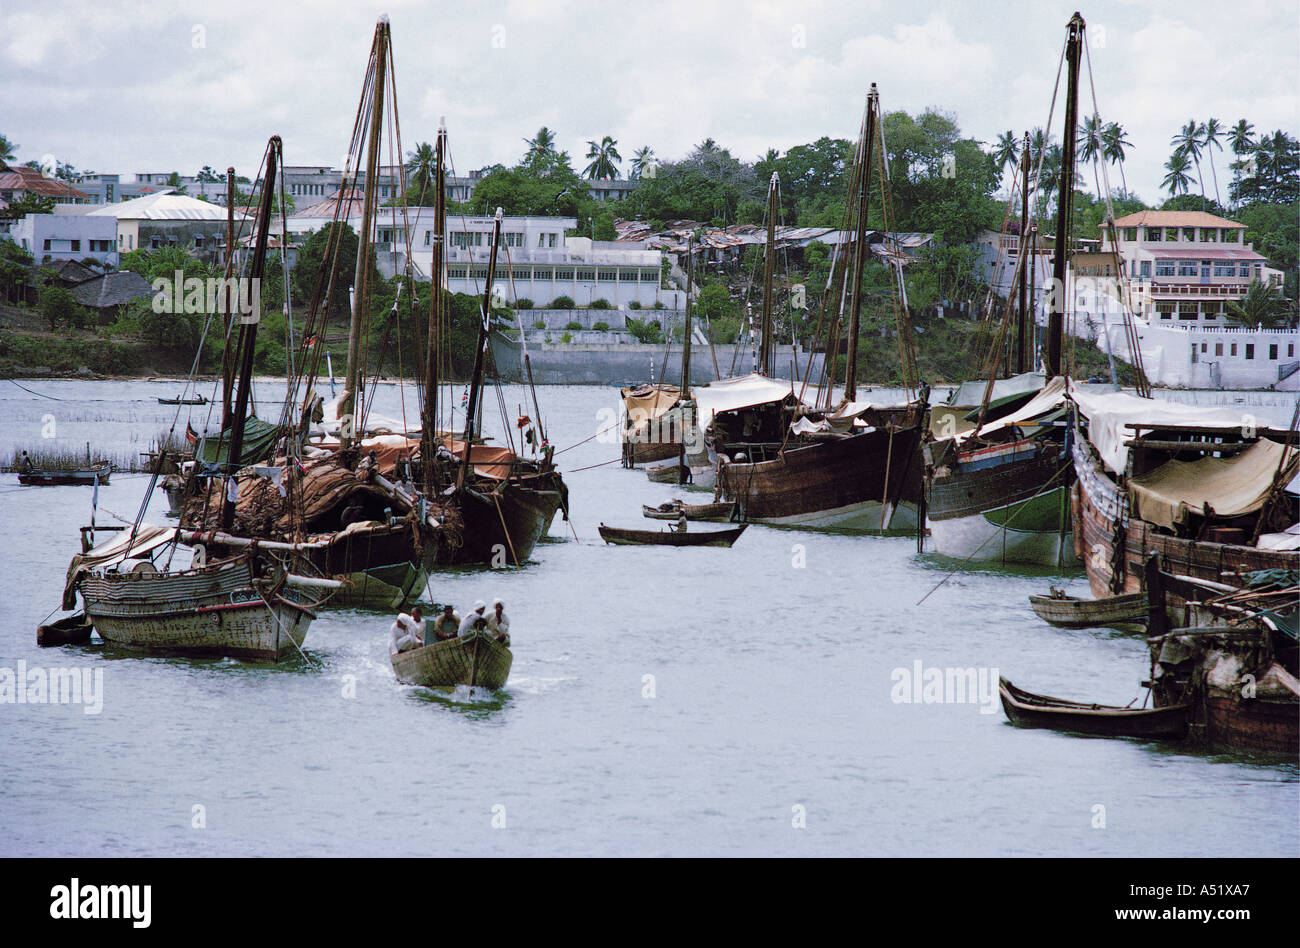 Ocean going Arabian style sailing dhows in the Old Harbour Mombasa Kenya East Africa Stock Photo